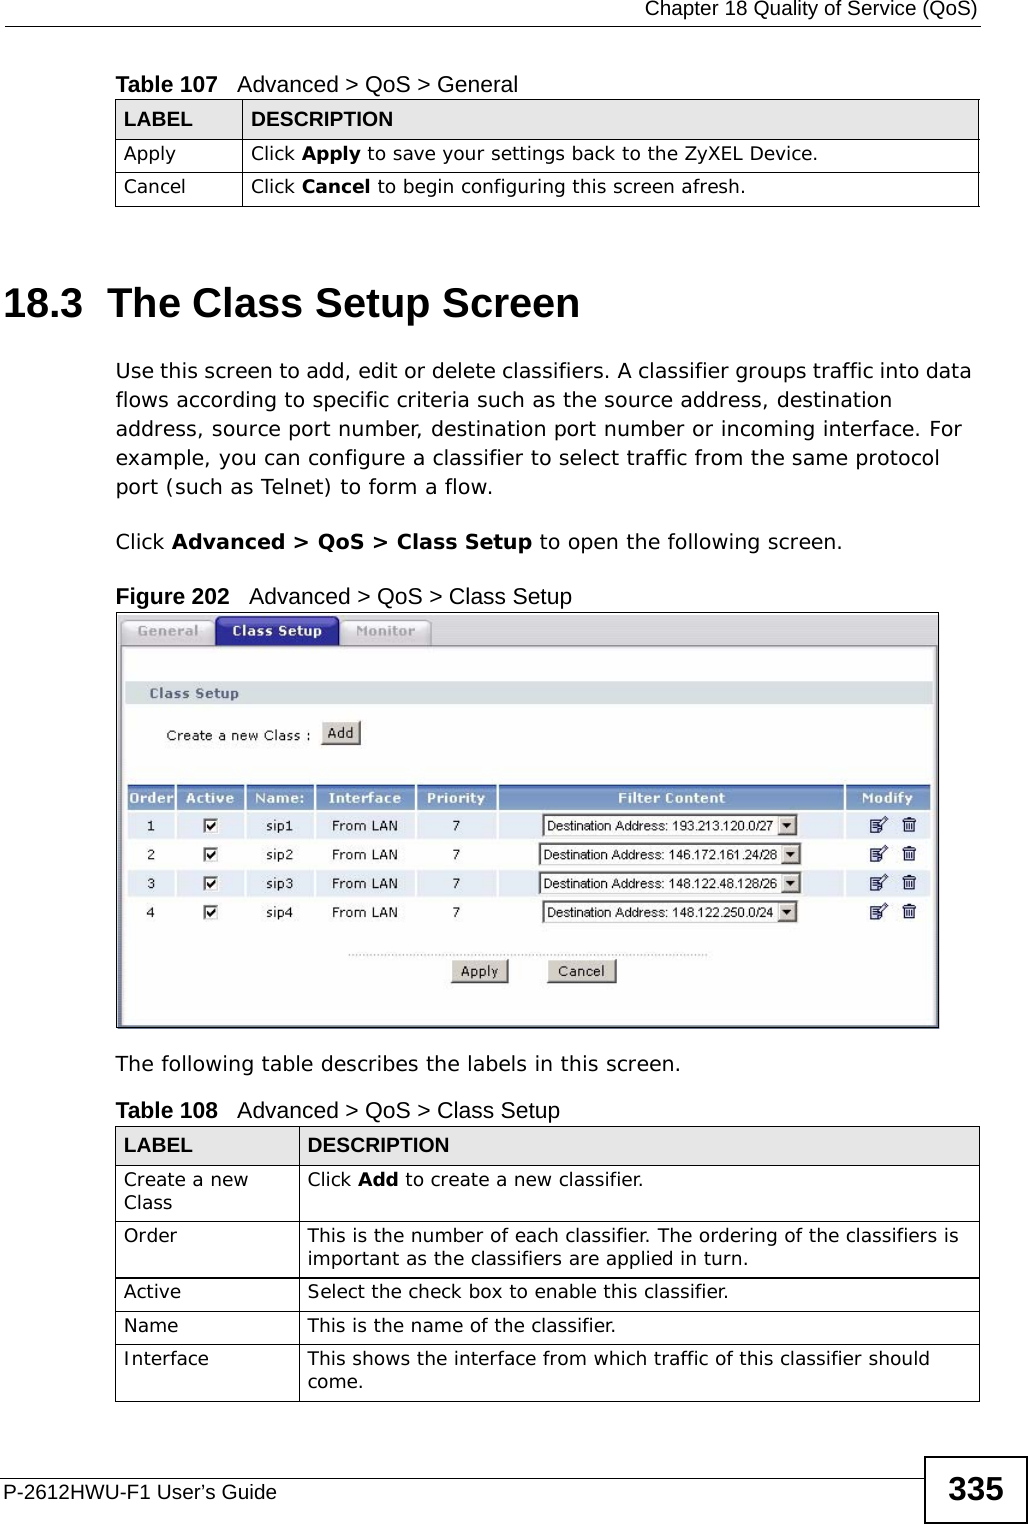  Chapter 18 Quality of Service (QoS)P-2612HWU-F1 User’s Guide 33518.3  The Class Setup Screen   Use this screen to add, edit or delete classifiers. A classifier groups traffic into data flows according to specific criteria such as the source address, destination address, source port number, destination port number or incoming interface. For example, you can configure a classifier to select traffic from the same protocol port (such as Telnet) to form a flow.Click Advanced &gt; QoS &gt; Class Setup to open the following screen.Figure 202   Advanced &gt; QoS &gt; Class SetupThe following table describes the labels in this screen.  Apply Click Apply to save your settings back to the ZyXEL Device.Cancel Click Cancel to begin configuring this screen afresh.Table 107   Advanced &gt; QoS &gt; GeneralLABEL DESCRIPTIONTable 108   Advanced &gt; QoS &gt; Class SetupLABEL DESCRIPTIONCreate a new Class Click Add to create a new classifier.Order This is the number of each classifier. The ordering of the classifiers is important as the classifiers are applied in turn.Active Select the check box to enable this classifier.Name This is the name of the classifier.Interface This shows the interface from which traffic of this classifier should come.